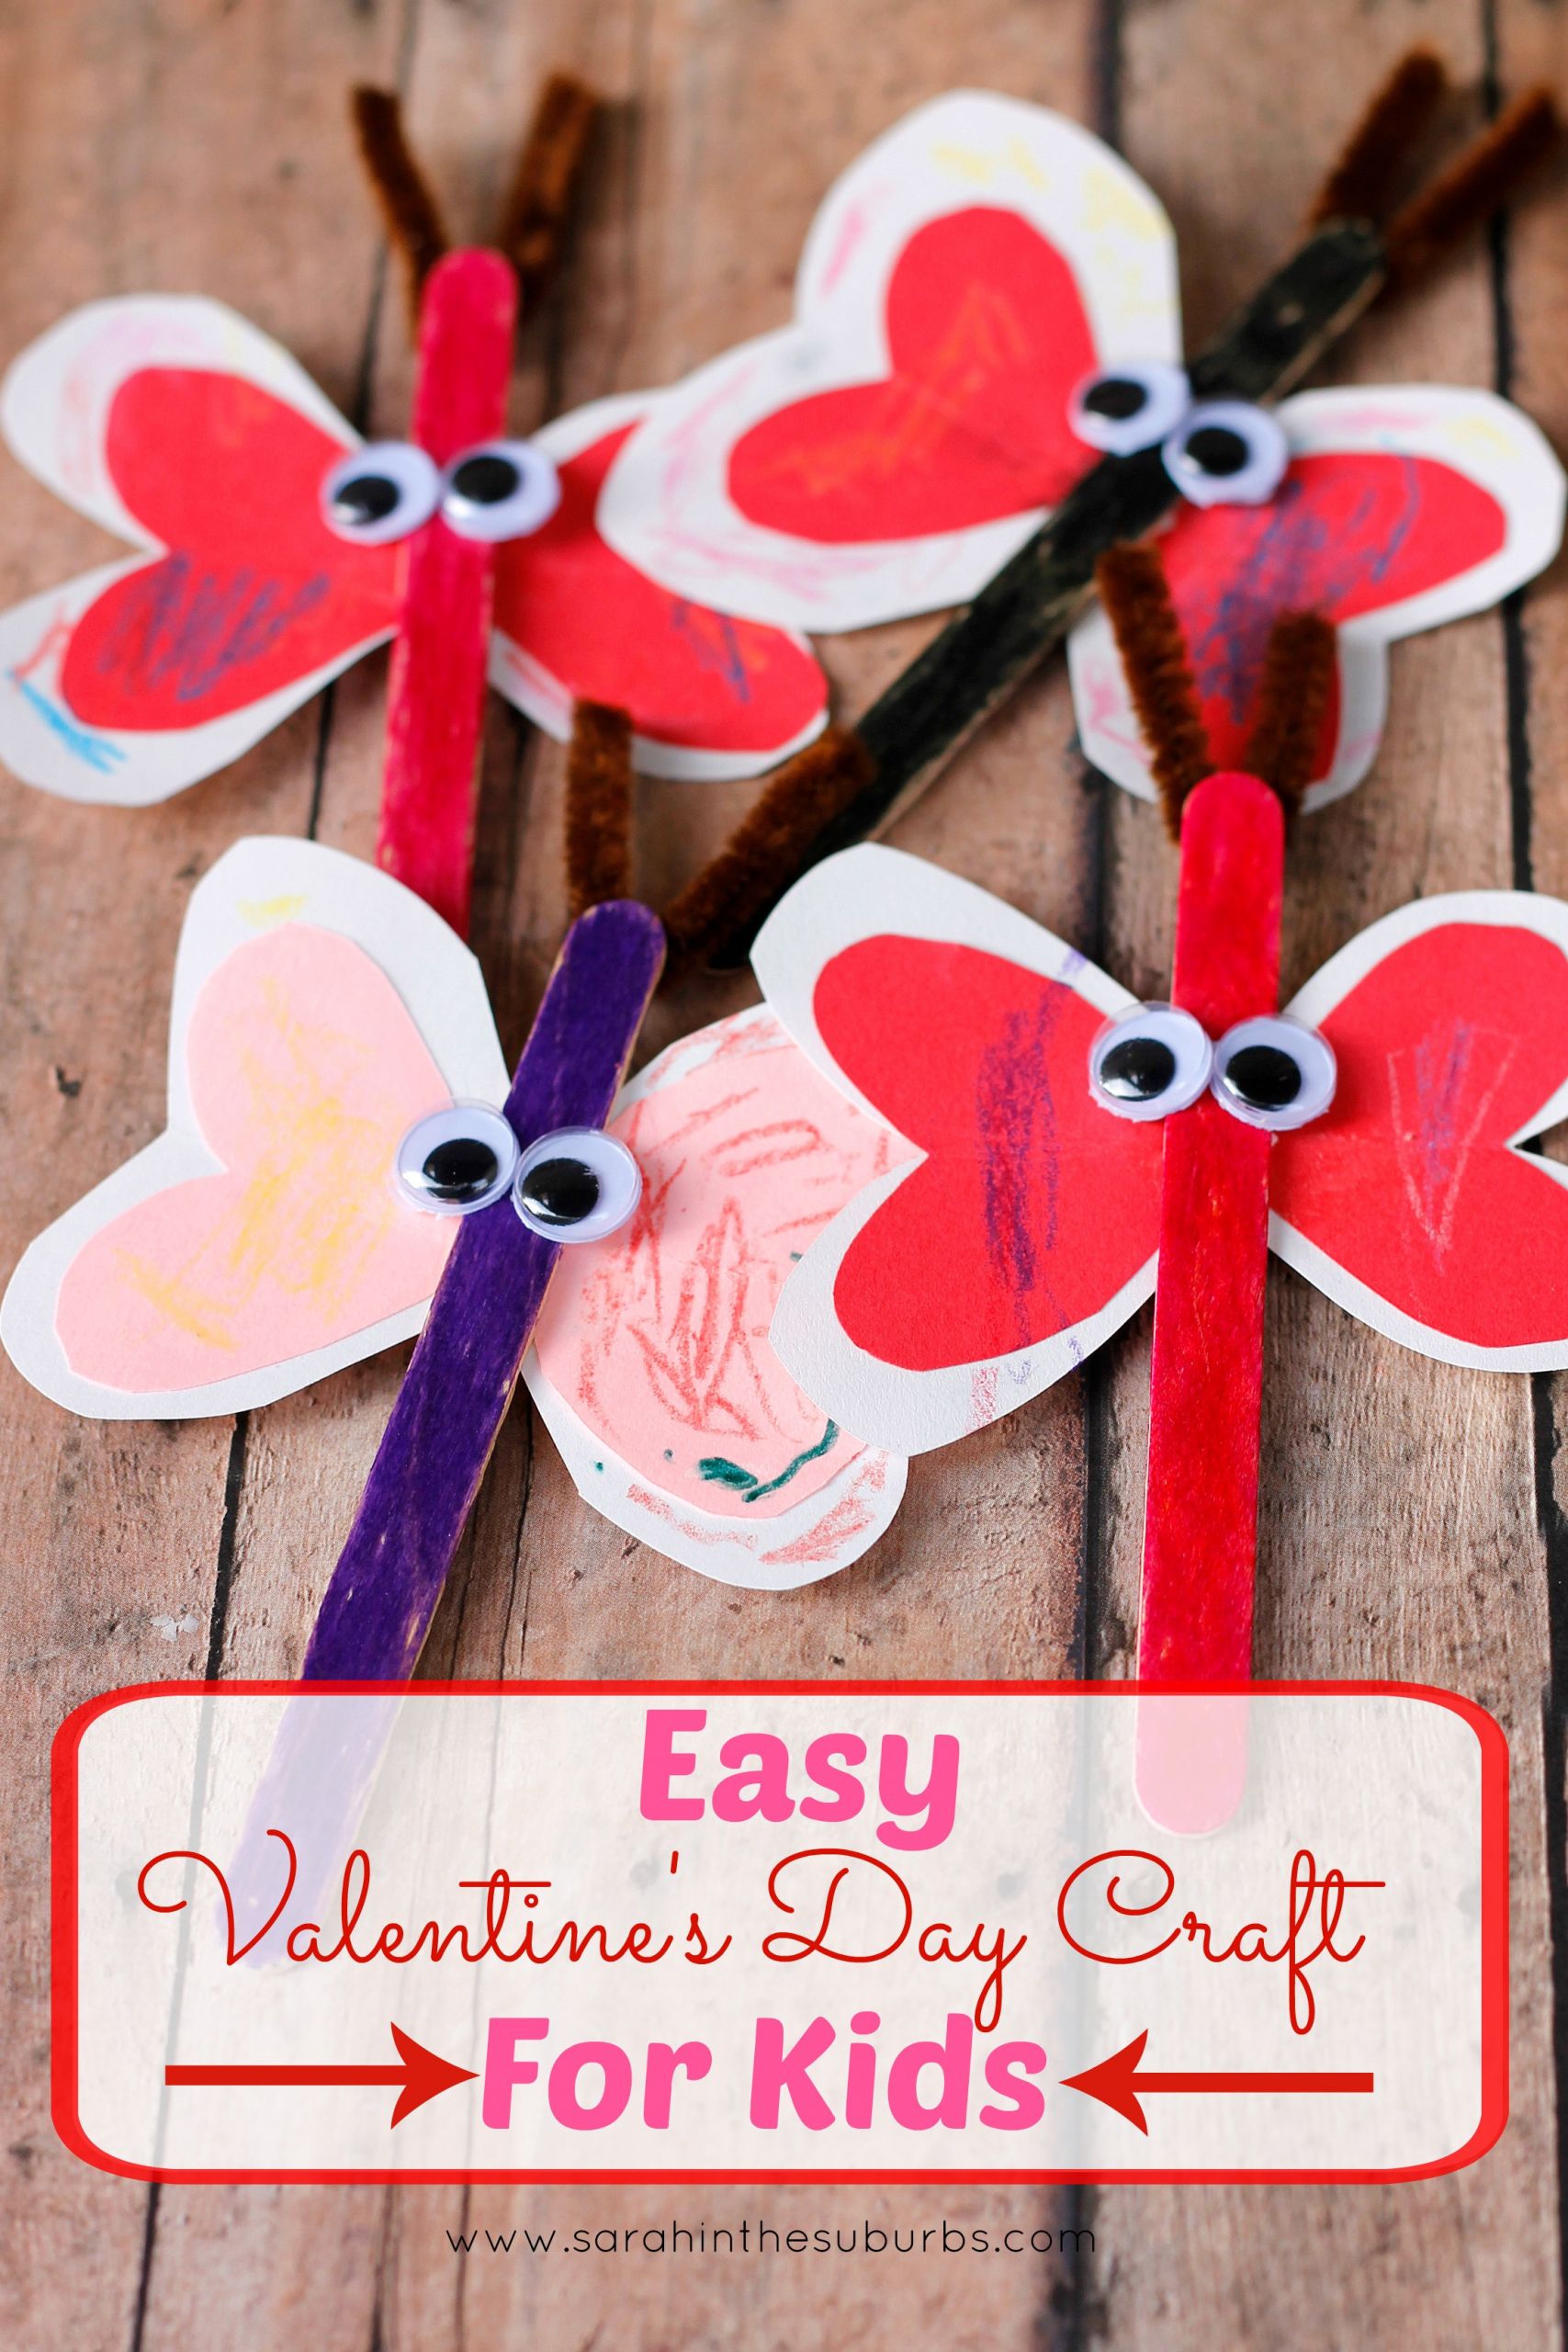 Valentines Craft Ideas For Toddlers
 Love Bug Valentine s Day Craft for Kids Sarah in the Suburbs